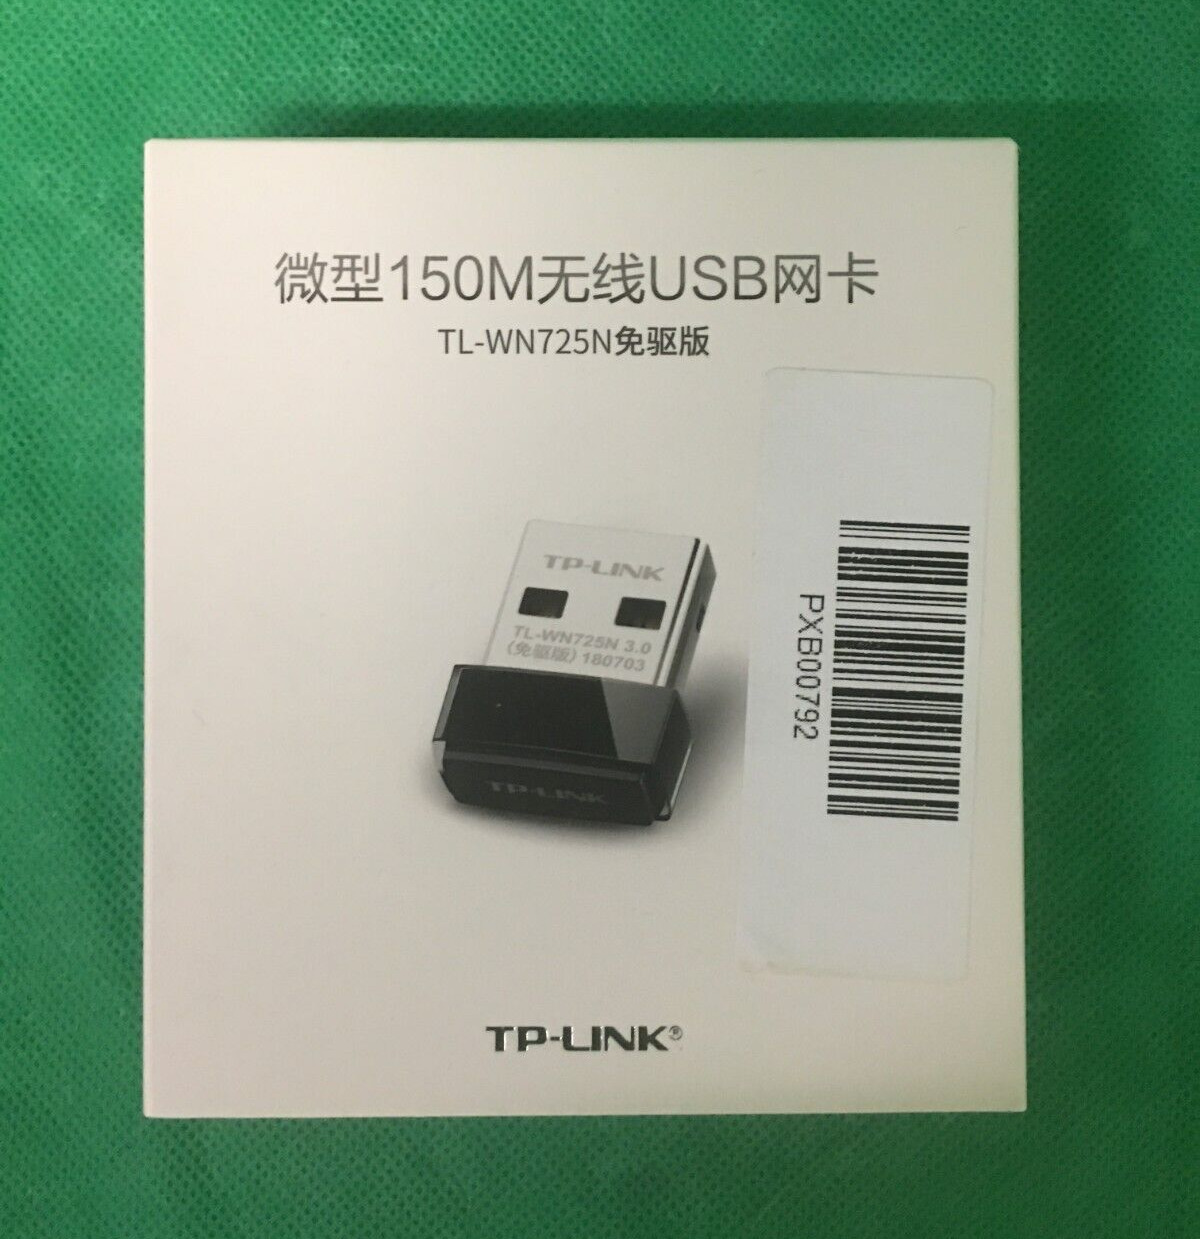 TP-Link TL-WN725N 150Mbps Wireless N USB Adapter - NEW